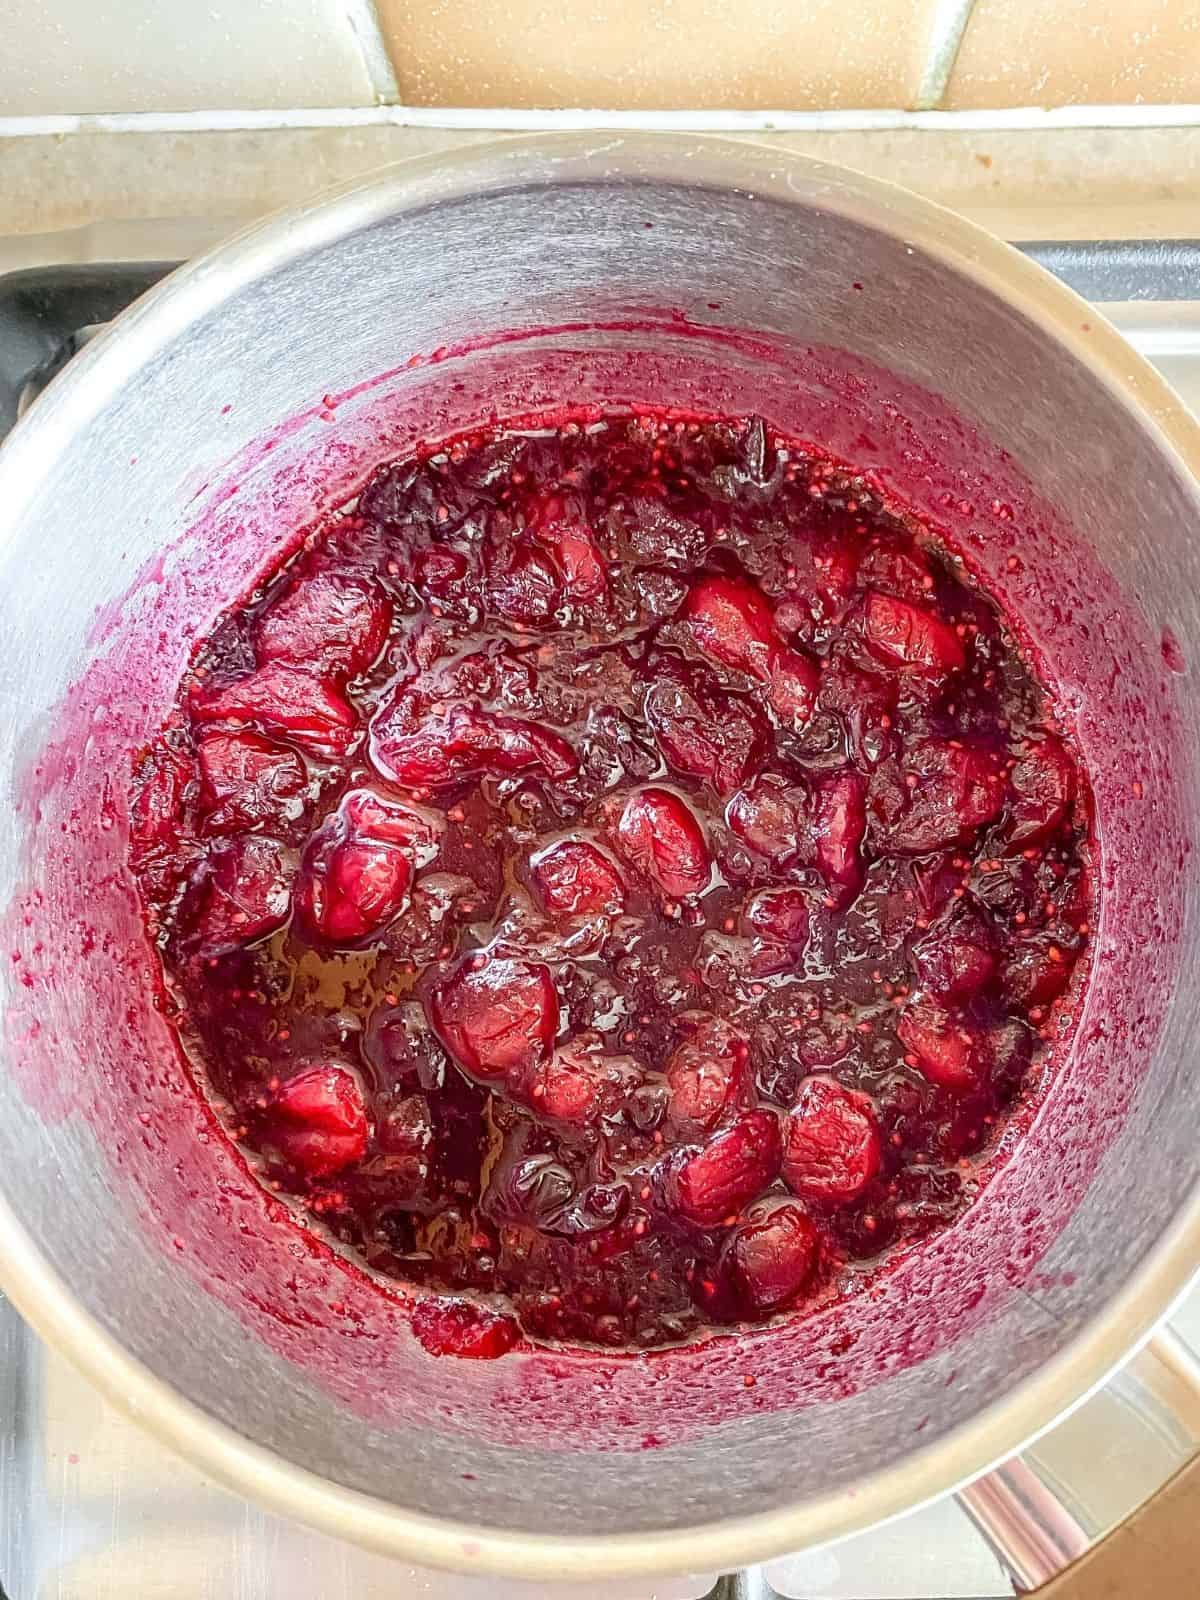 cranberries cooked down in a pot.